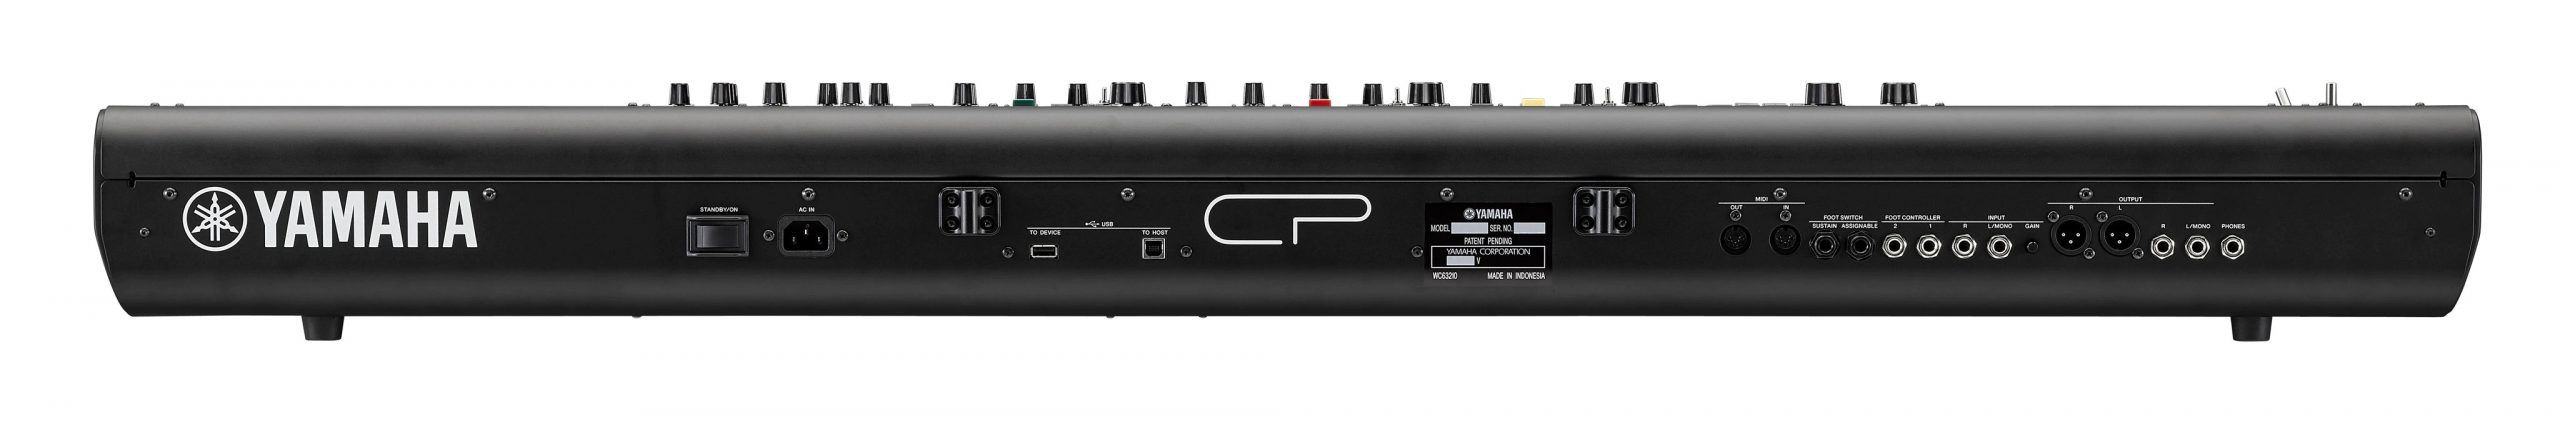 Connectivity features of Yamaha CP88